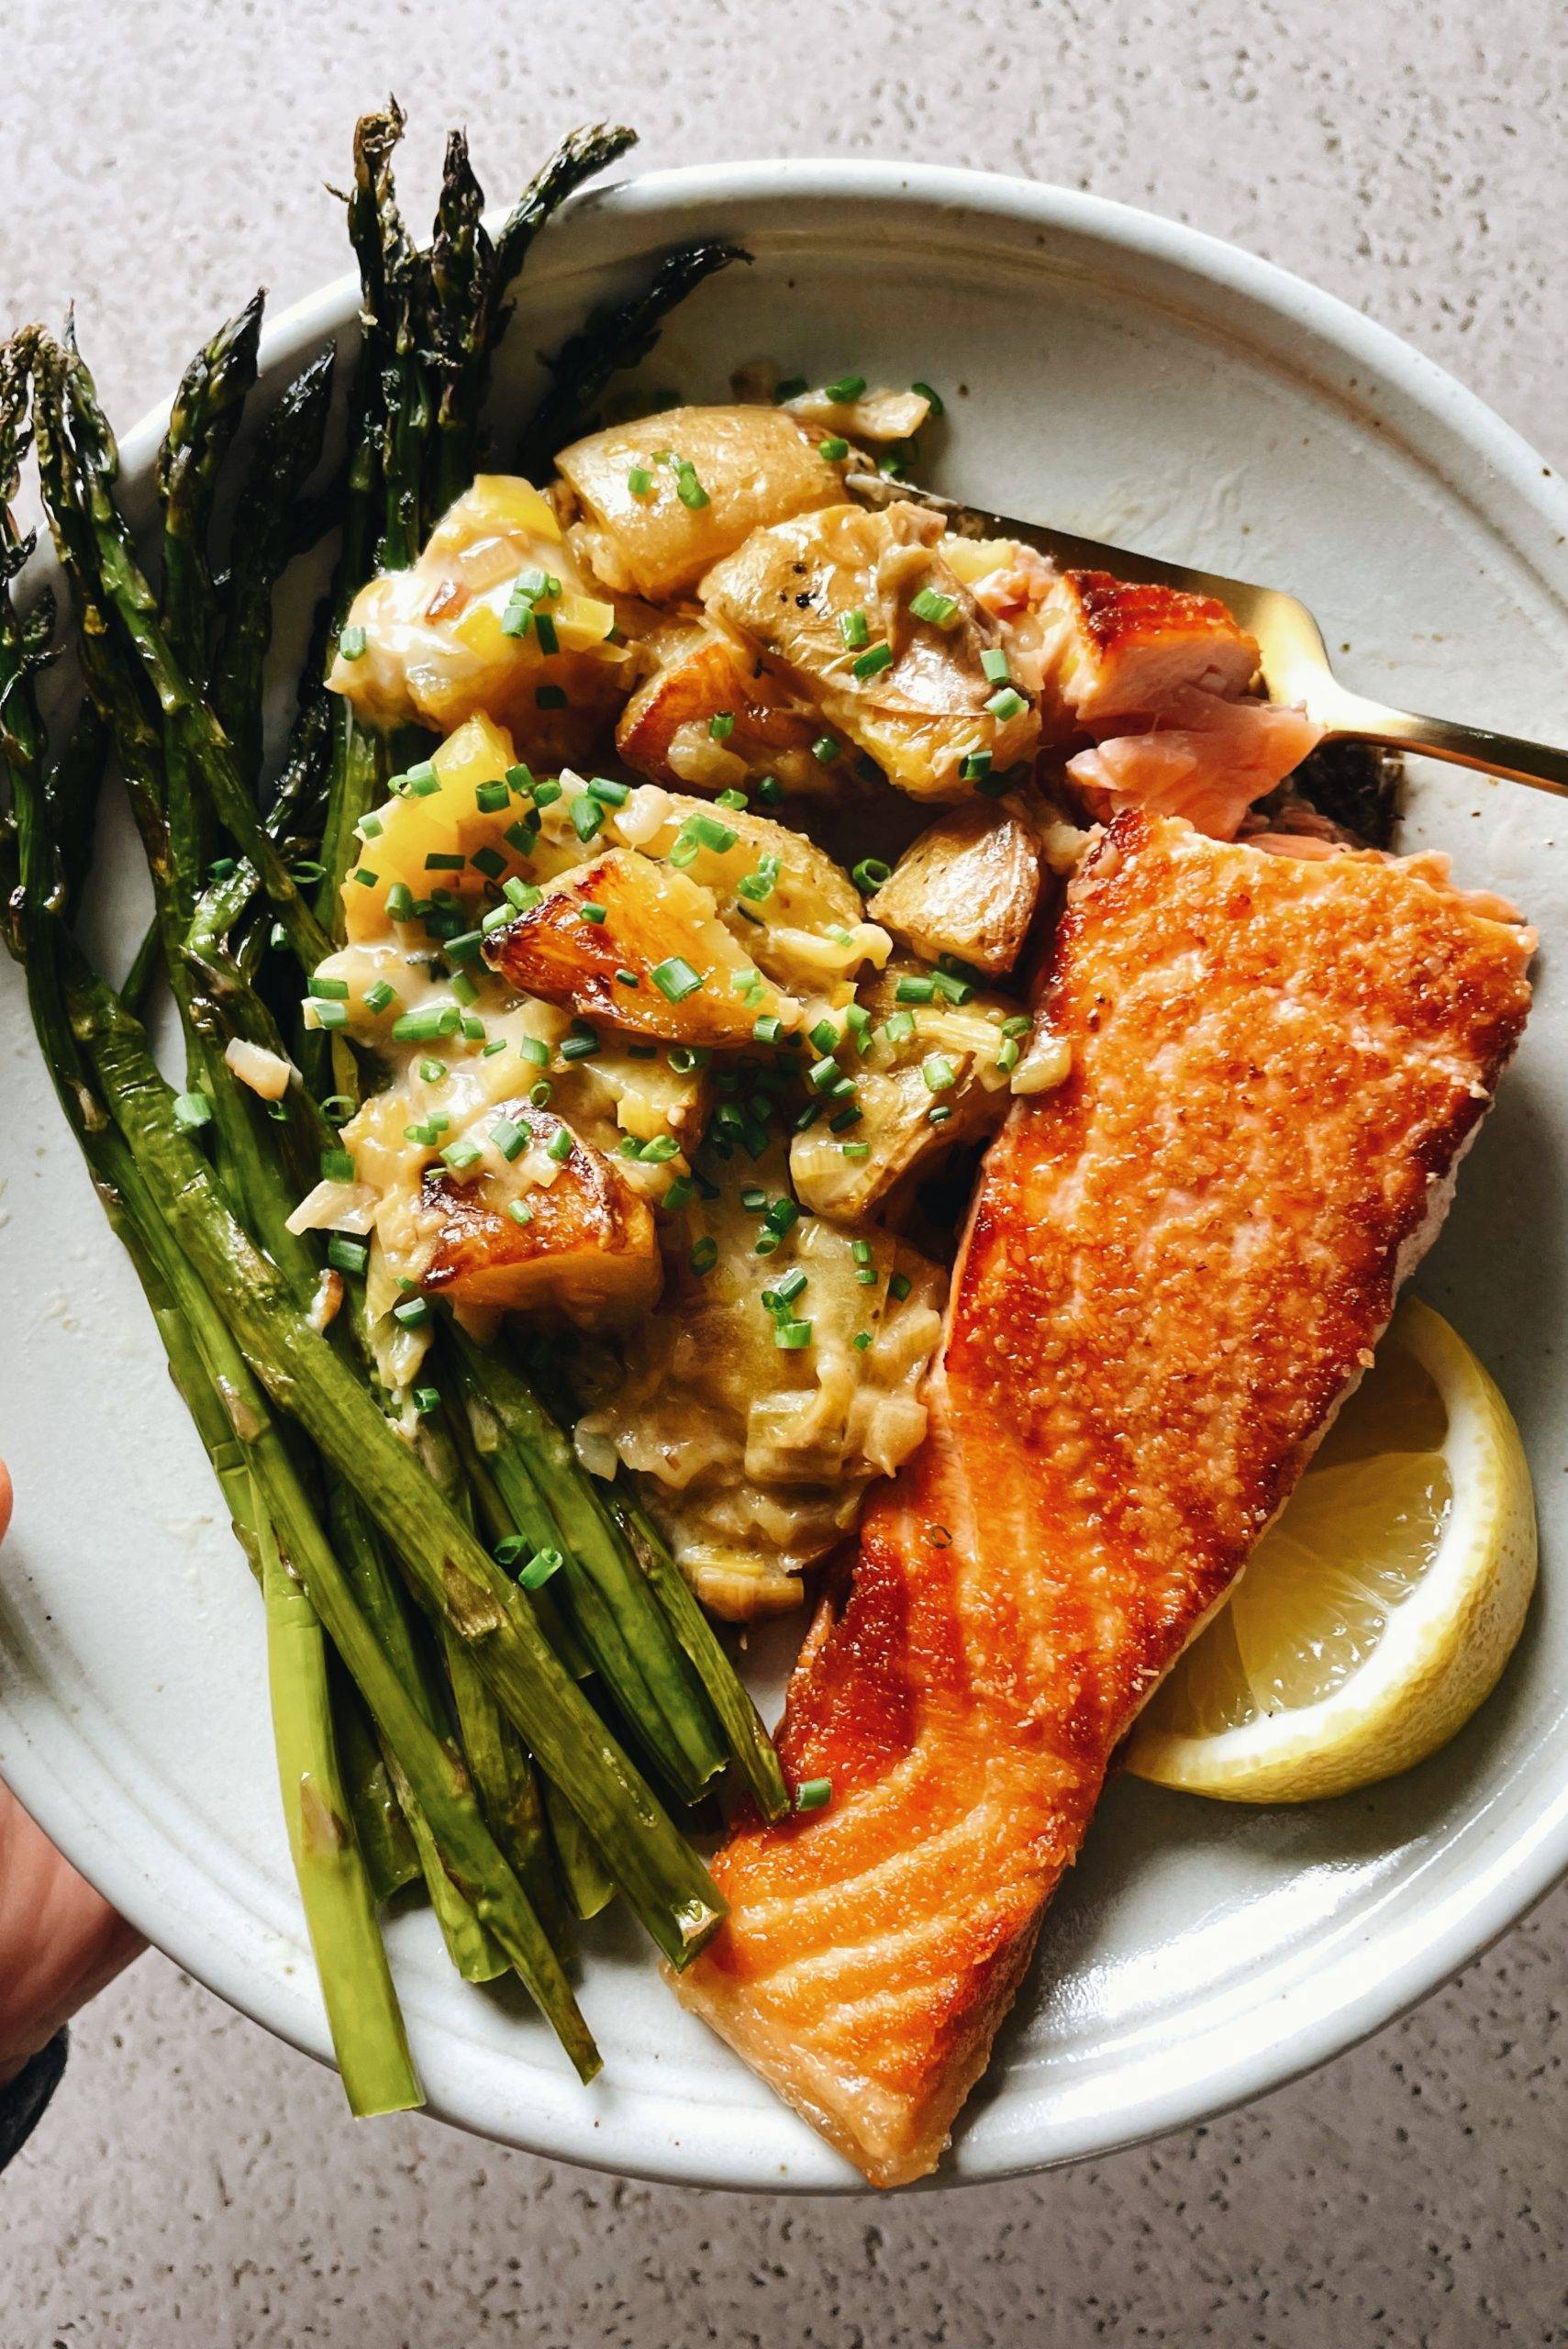 Pan-fried salmon on a plate with creamed leeks and asparagus